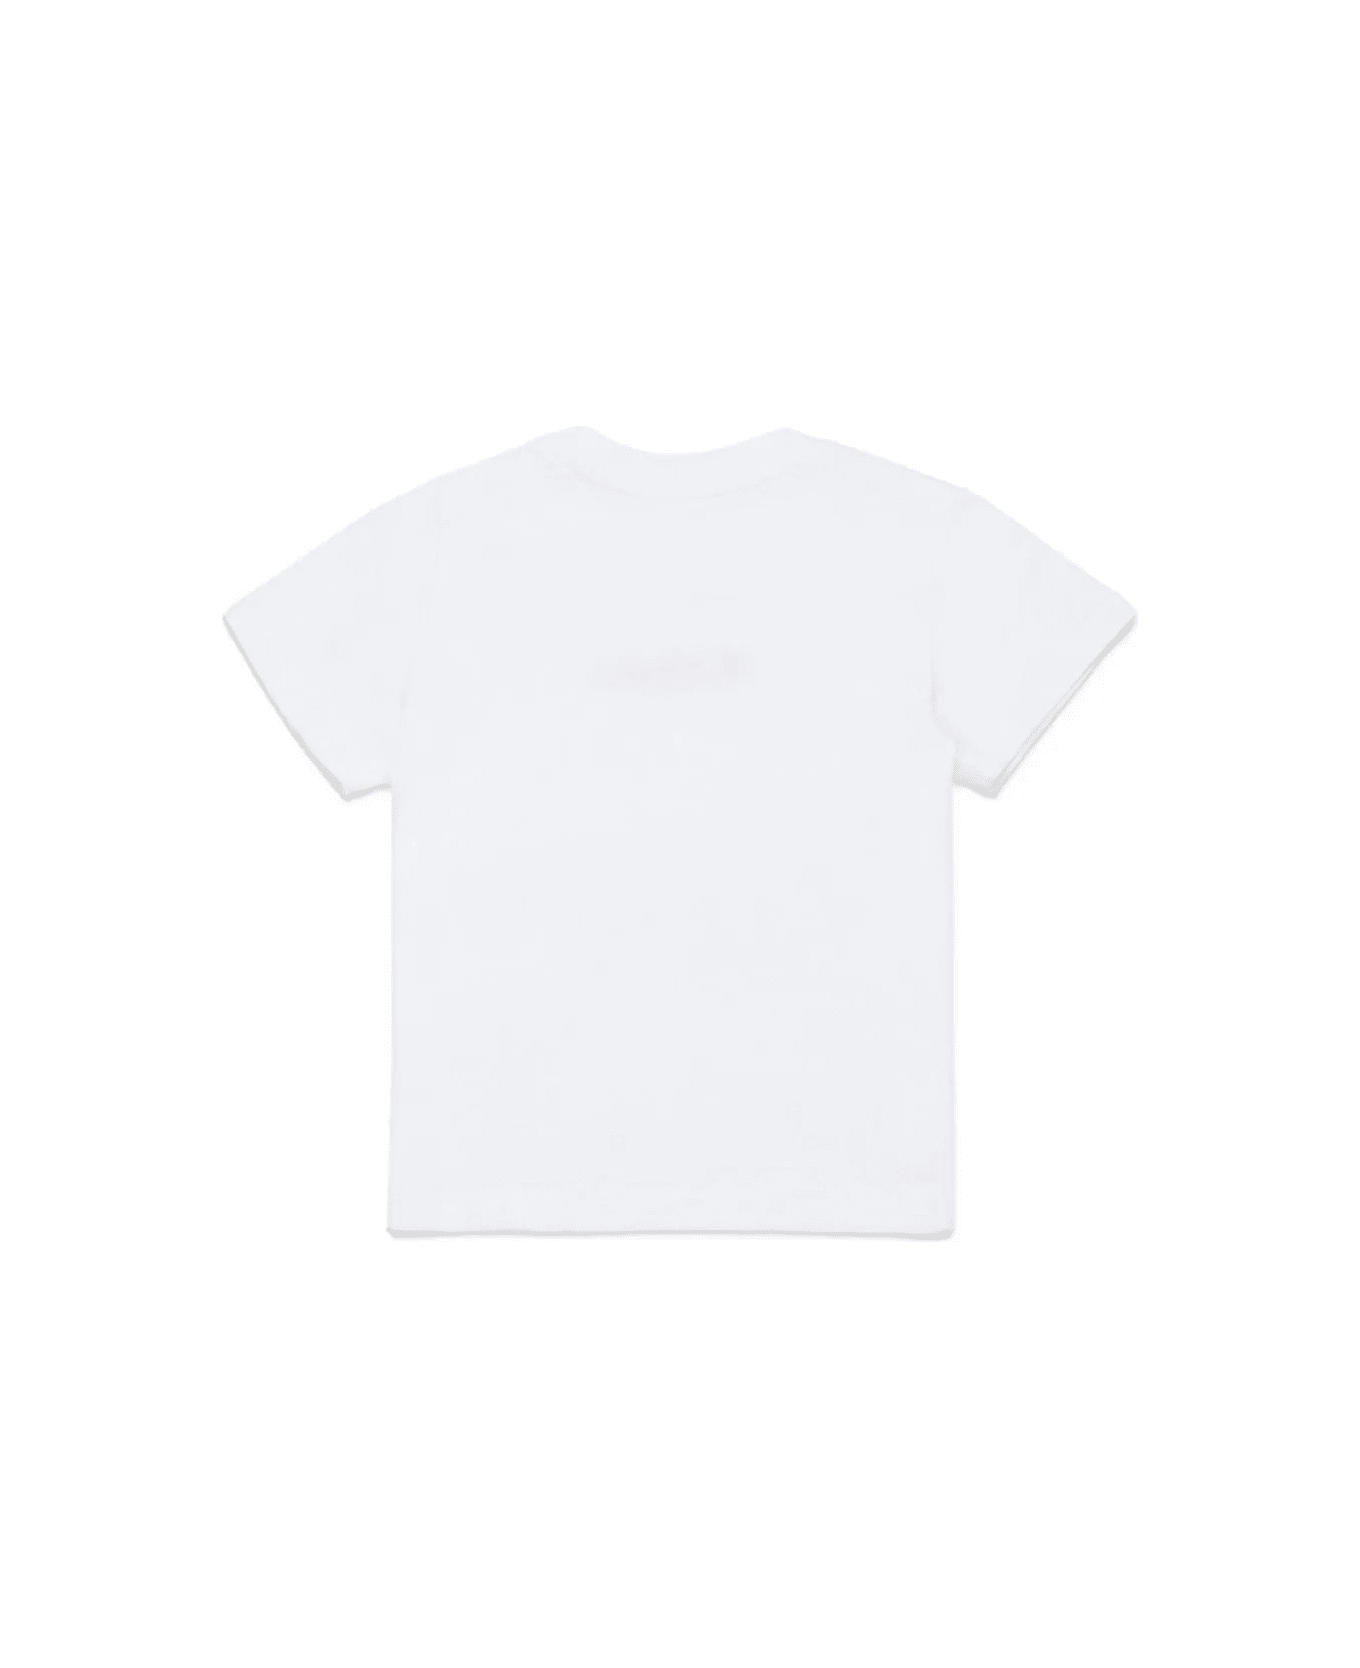 Dsquared2 White T-shirt With Brushstroke Effect With Contrasting Lettering - White